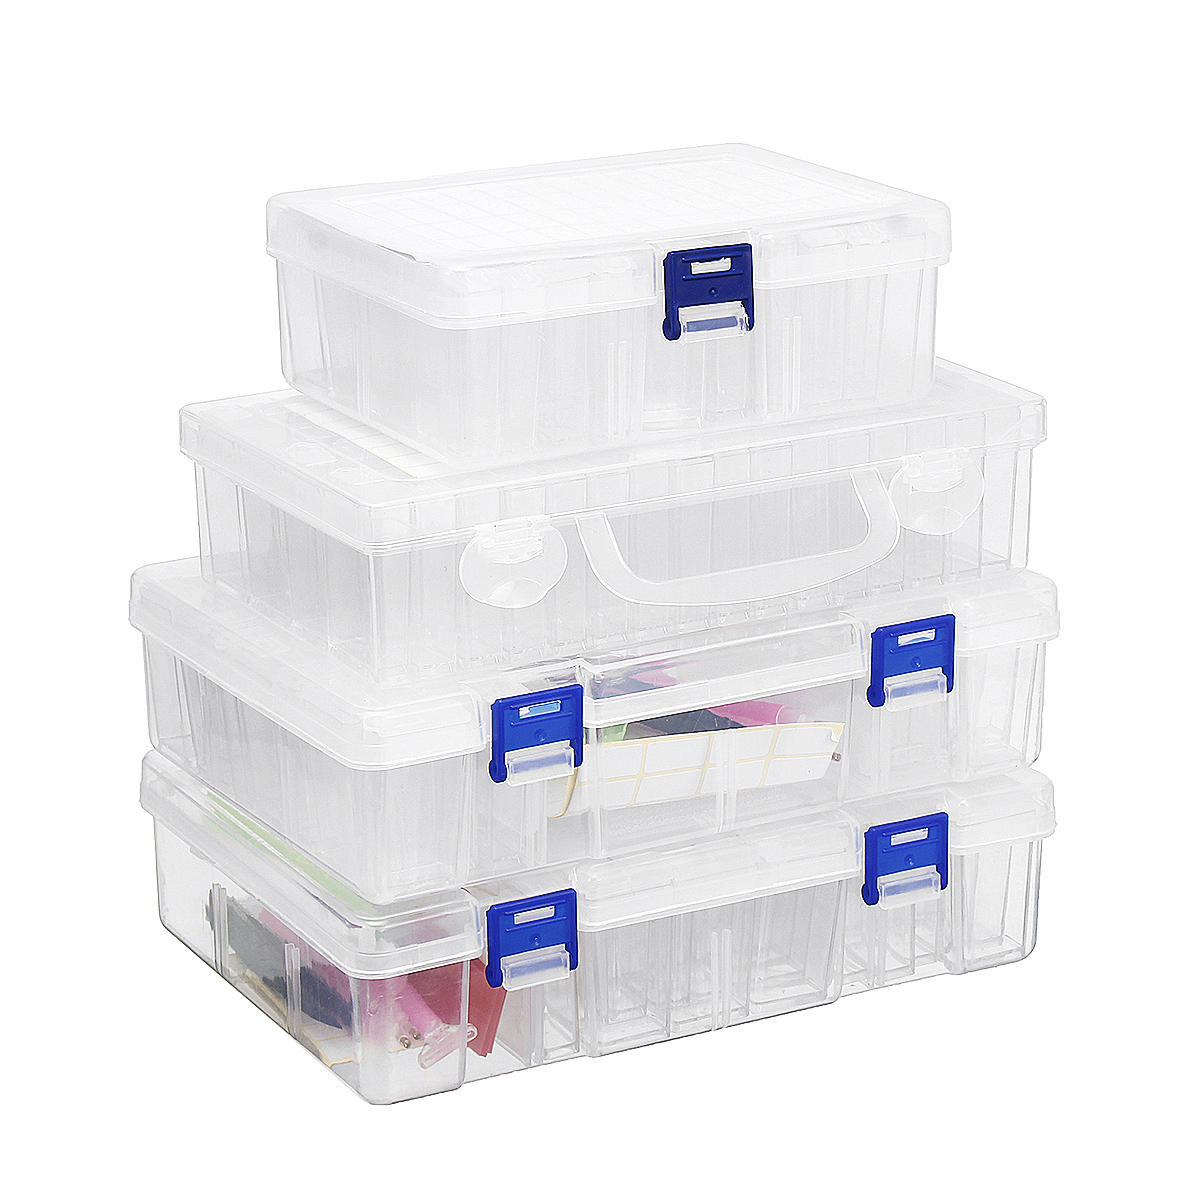 Upgrade Diamond Painting Tools Storage Box Containers Portable Bead Storage 64/42 Containers & Basic tools For 5D Diamon